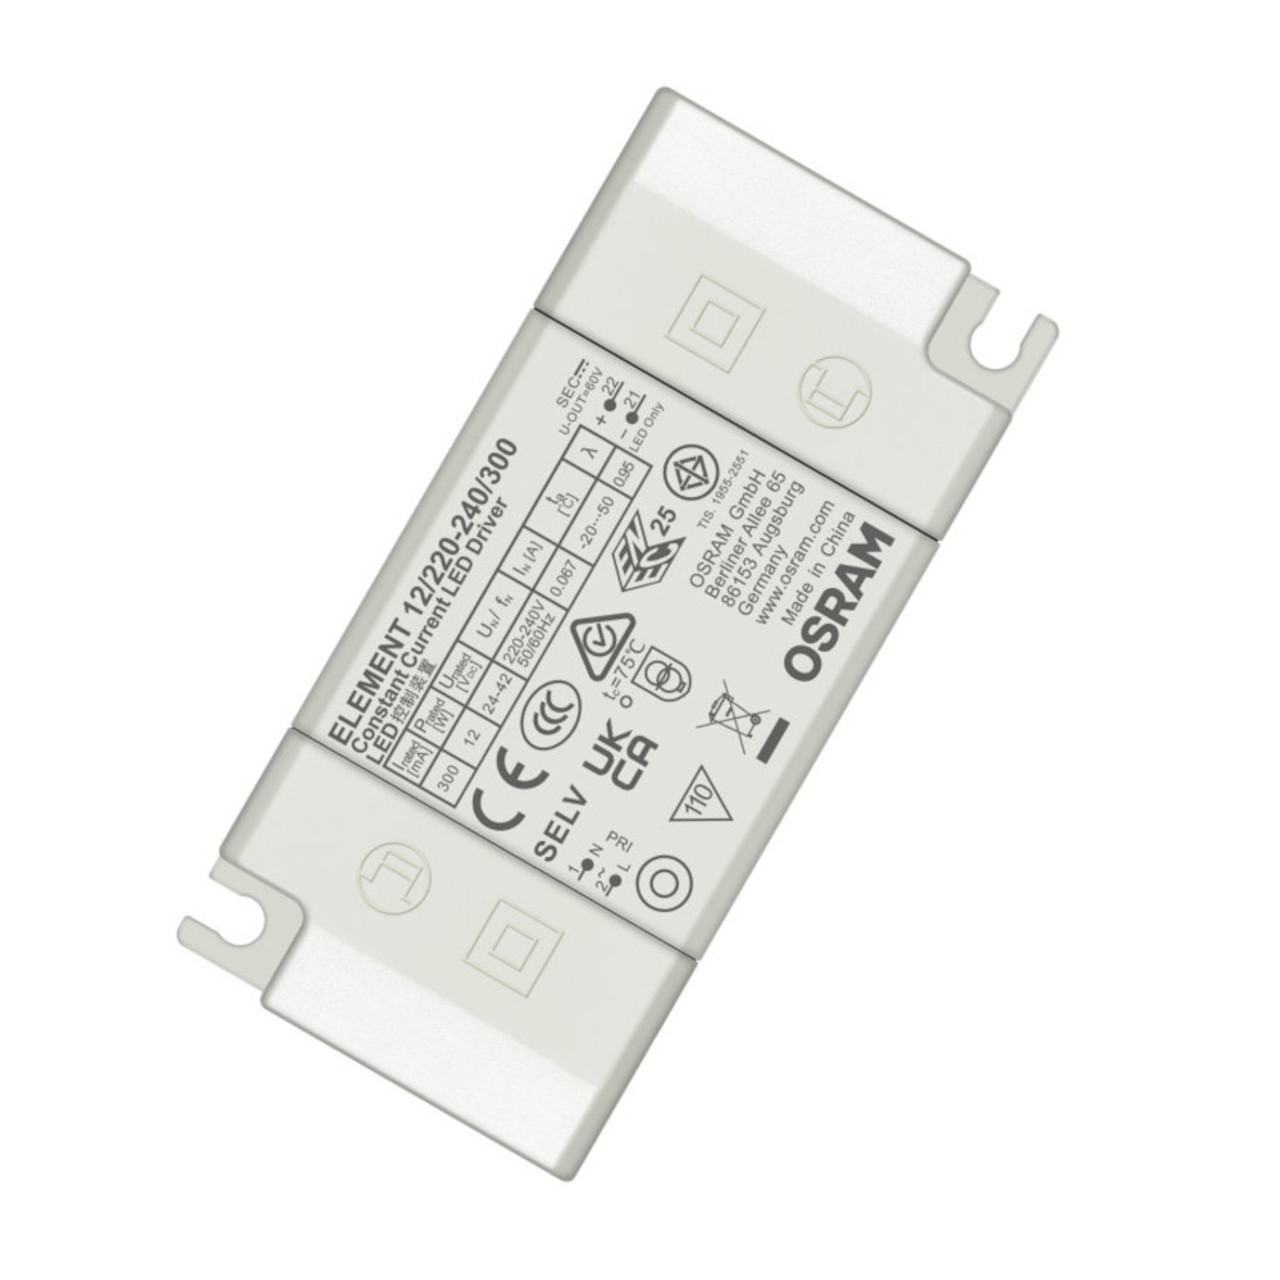 Osram Element G4 12W 300mA Constant Current LED Driver